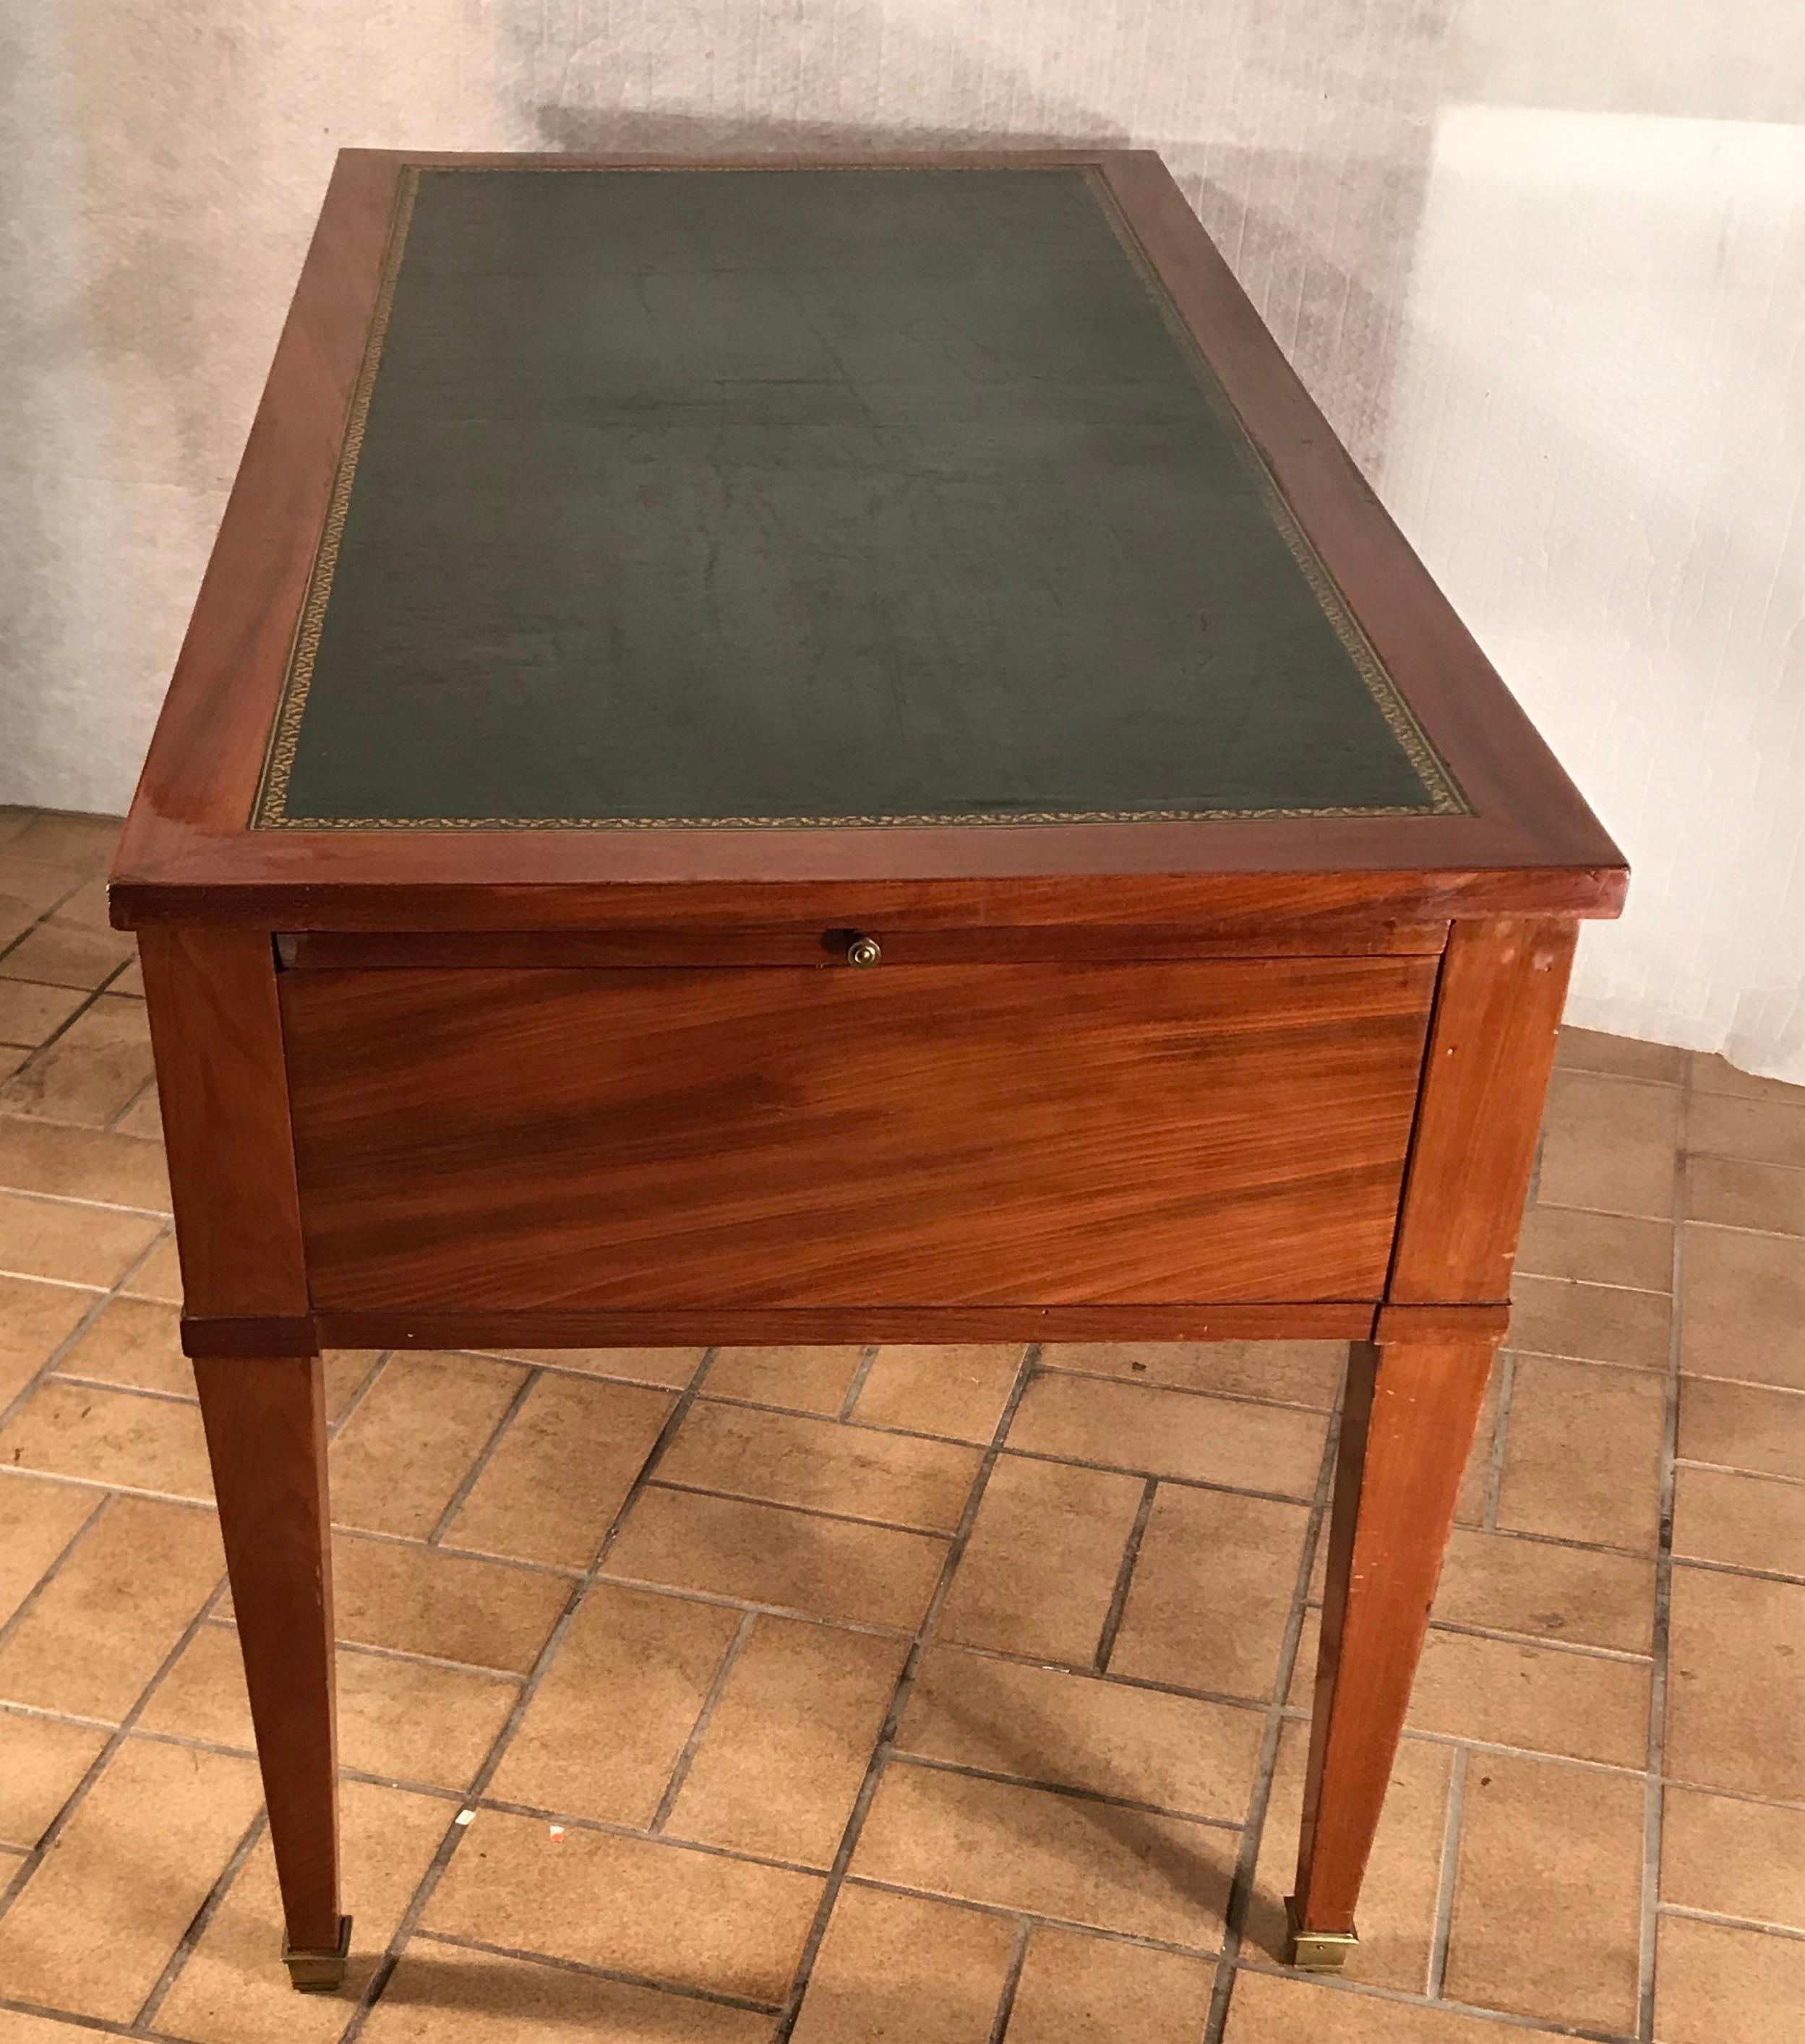 Directoire Bureau Plat, France, circa 1800.
Spacious and chic Directoire desk and the perfect piece of furniture for any home office. 
The bureau plat has an elegant mahogany veneer and a leather covering (later) on the top. Three drawers offer a